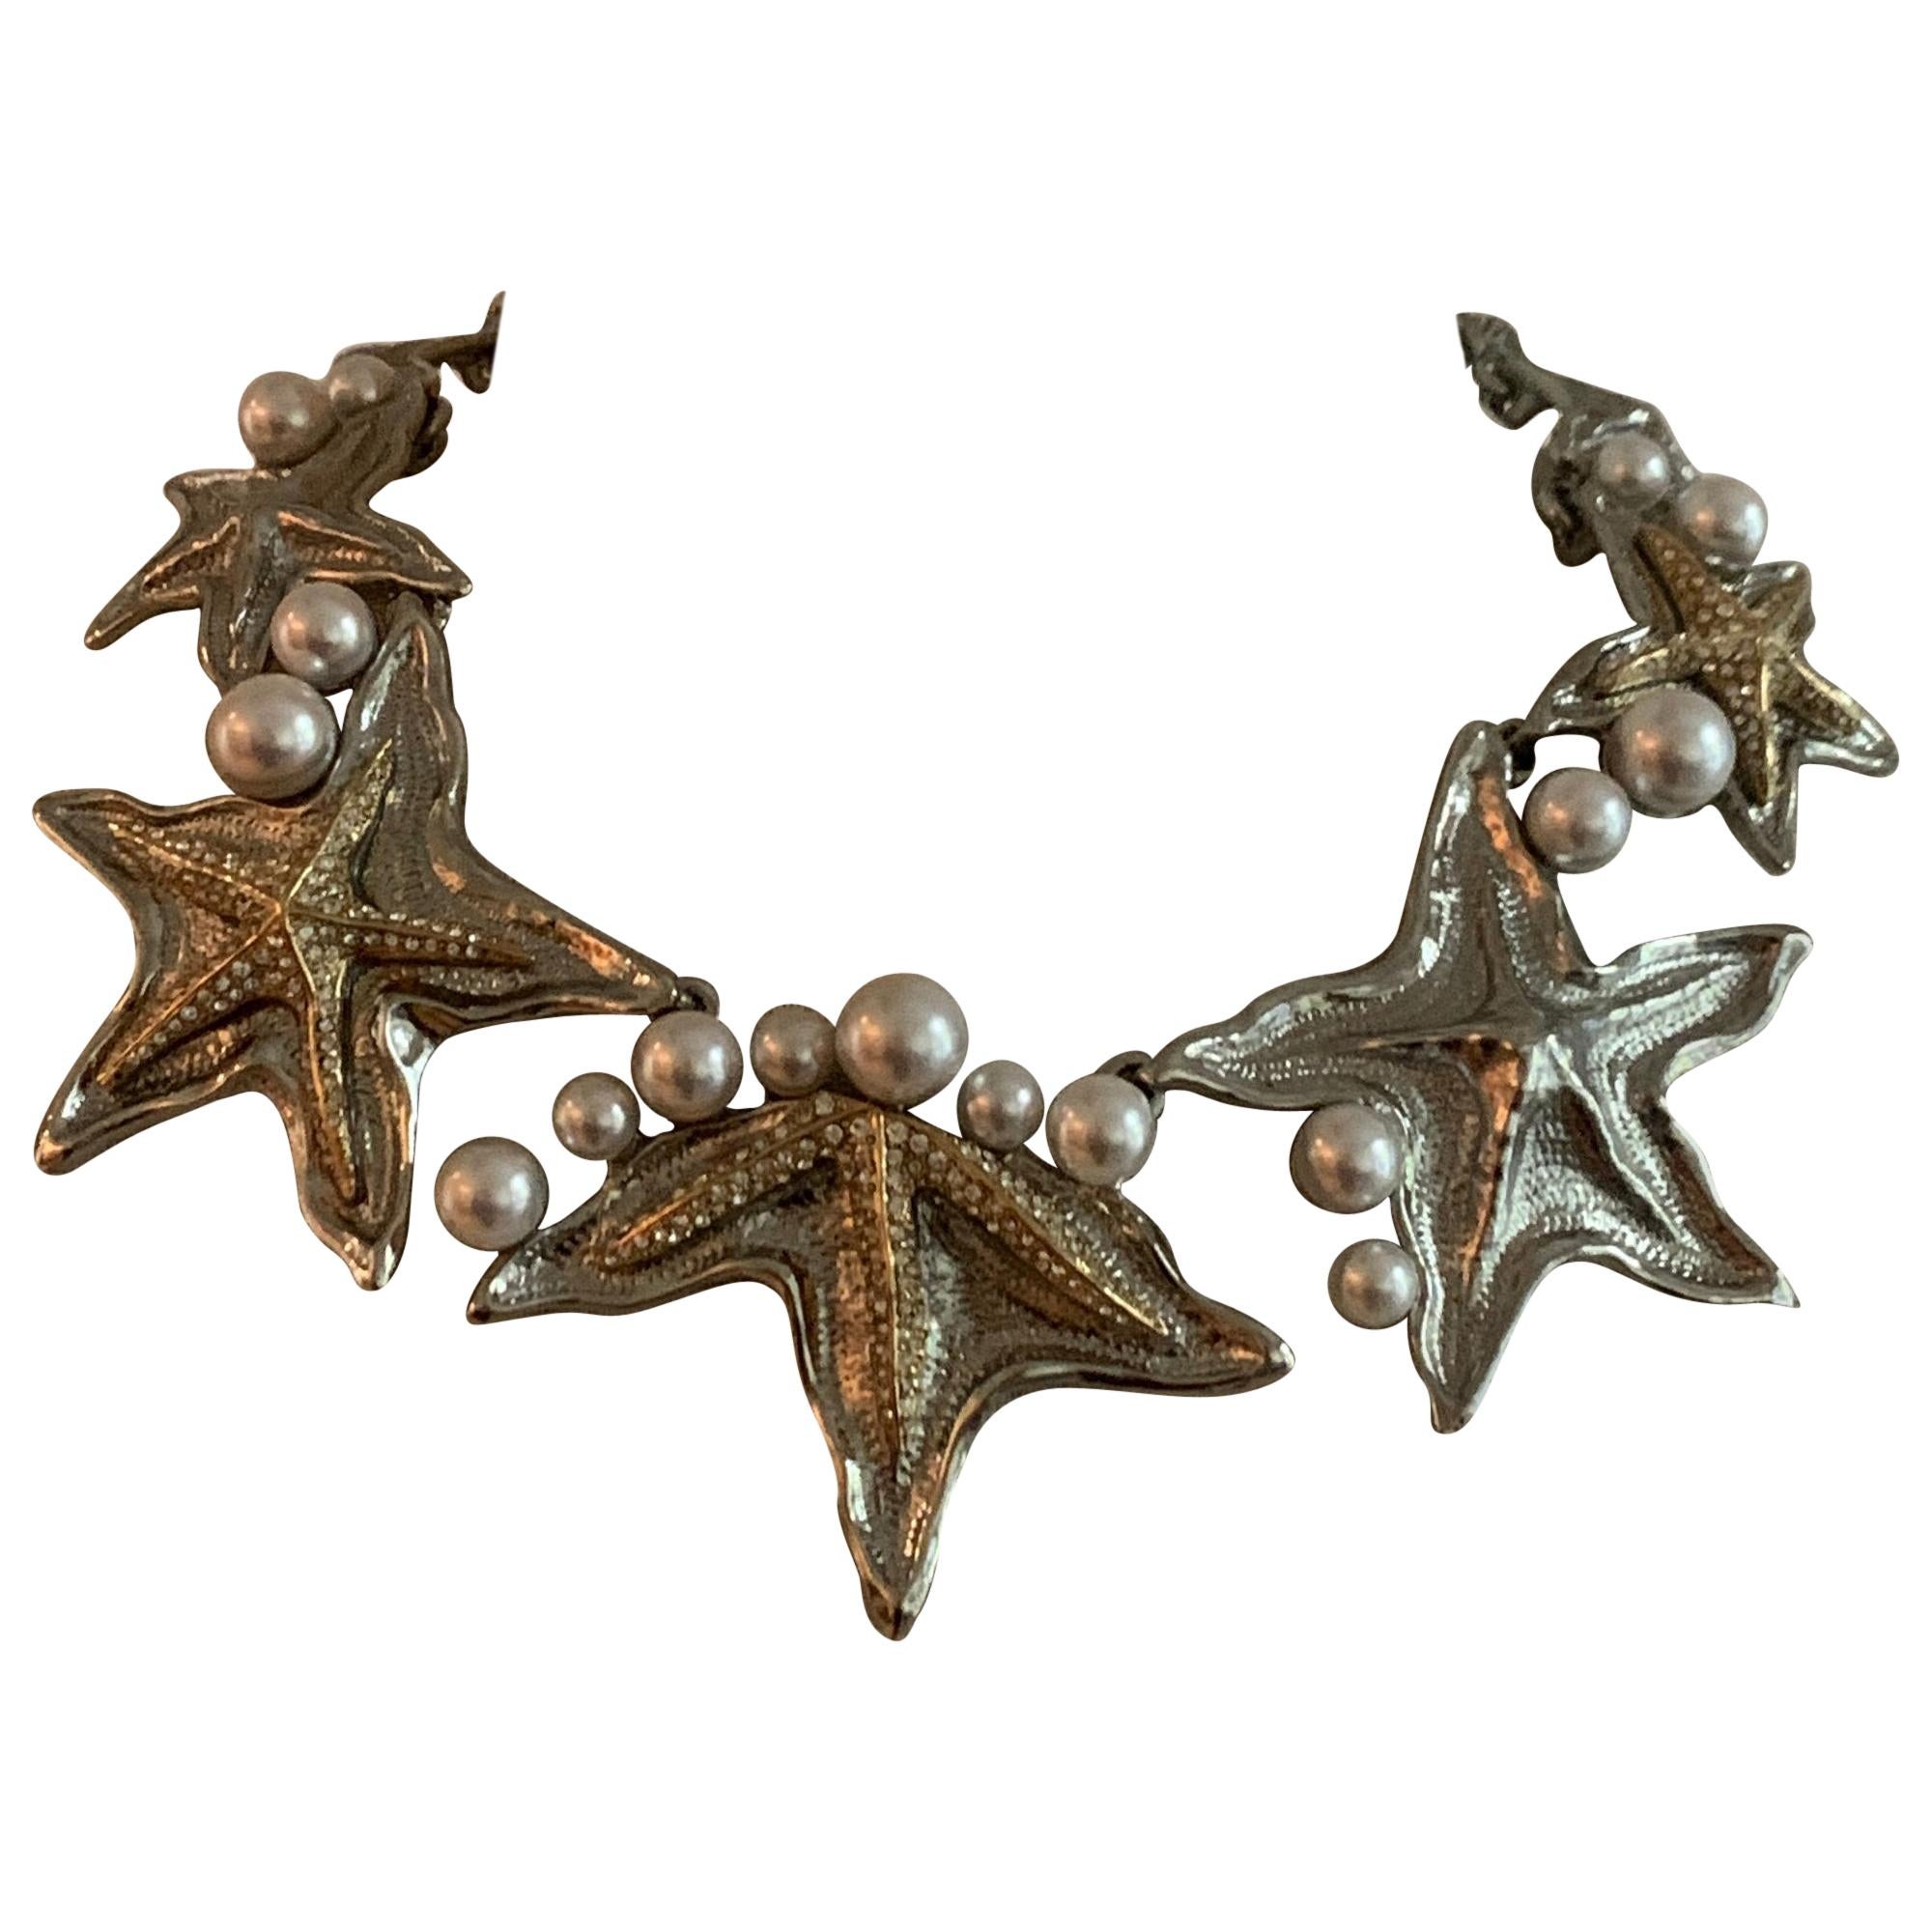 Oscar de la Renta Starfish Necklace in Silver and Gold Tone with Faux Pearls